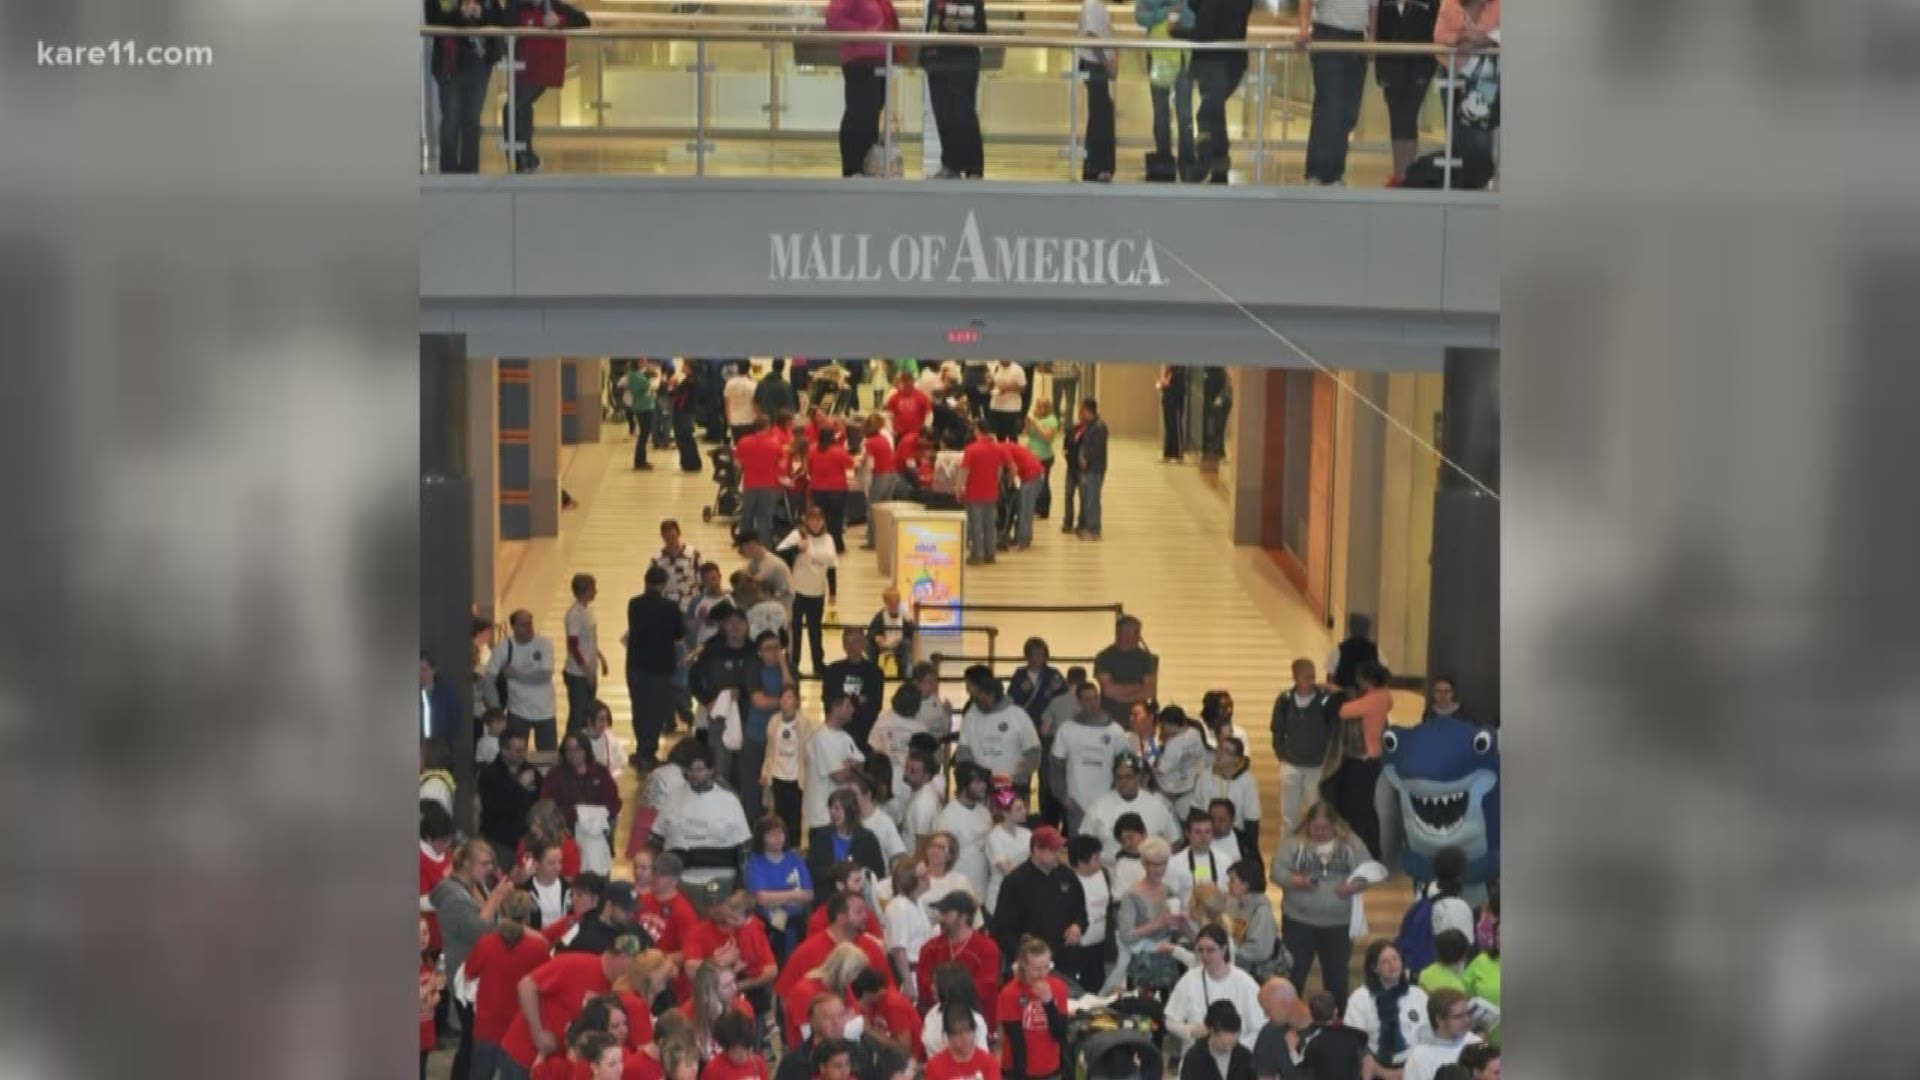 On Saturday, April 13, 2019, thousands of people will walk at the Mall of America in Bloomington to raise awareness. Fraser Walk for Autism is from 7 to 9:30 a.m. The mall-wide event is open to the public. https://kare11.tv/2IsH8HH